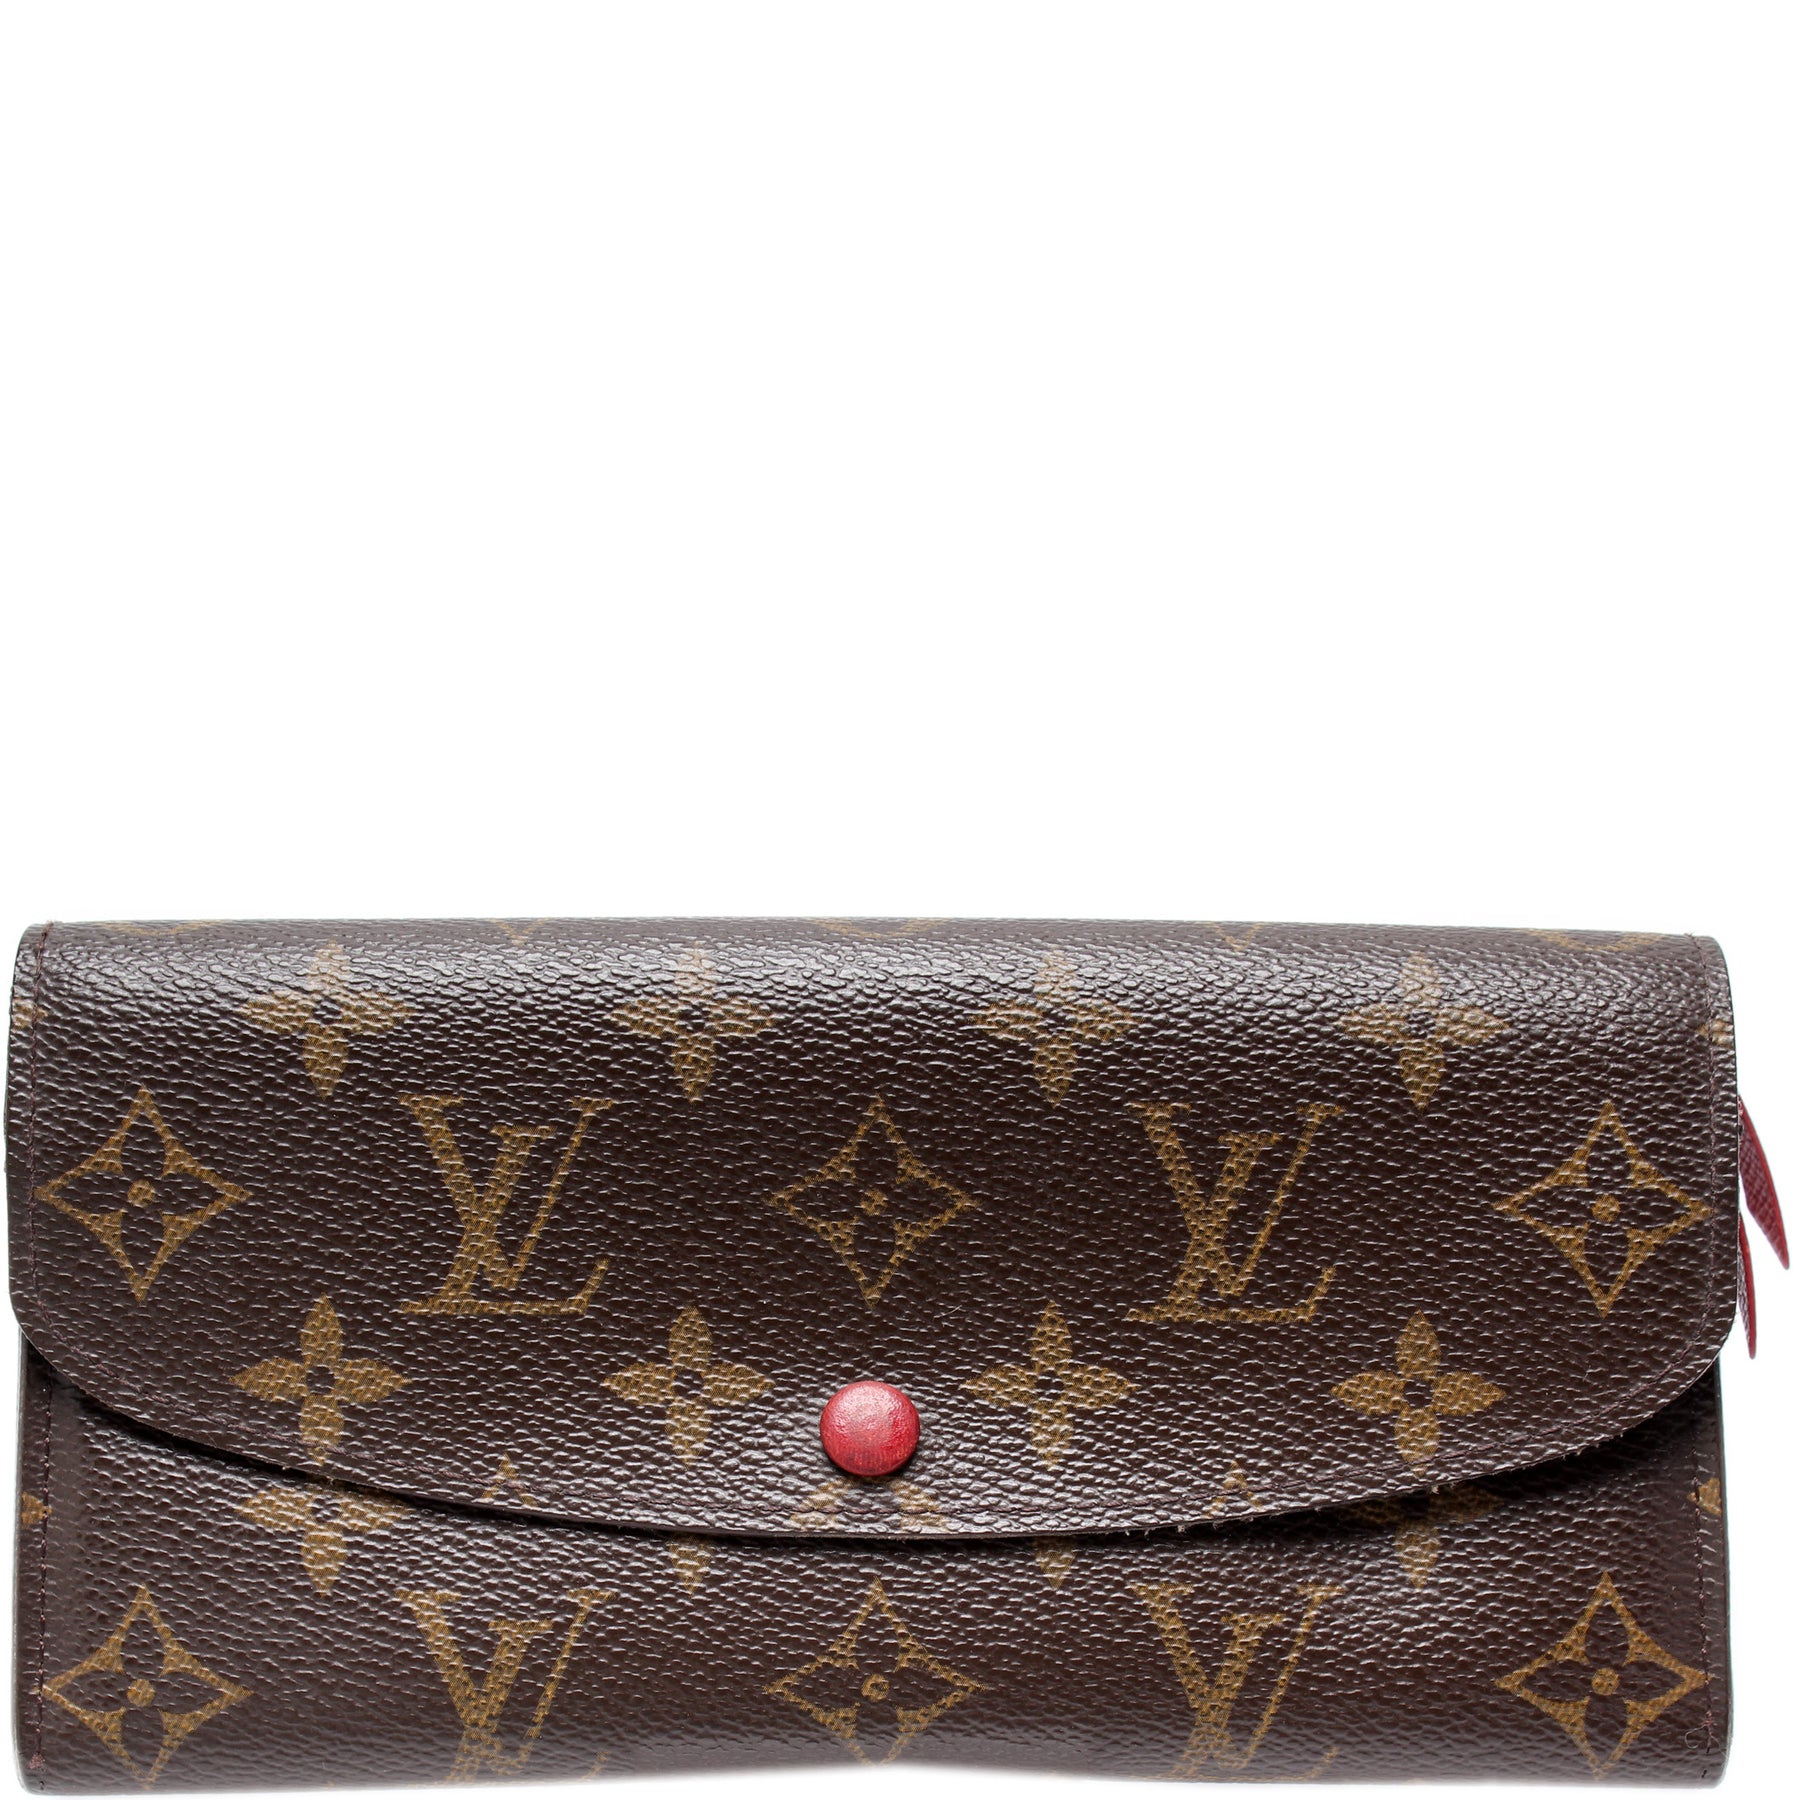 Louis Vuitton Red Josephine Wallet Beautiful Like New! With